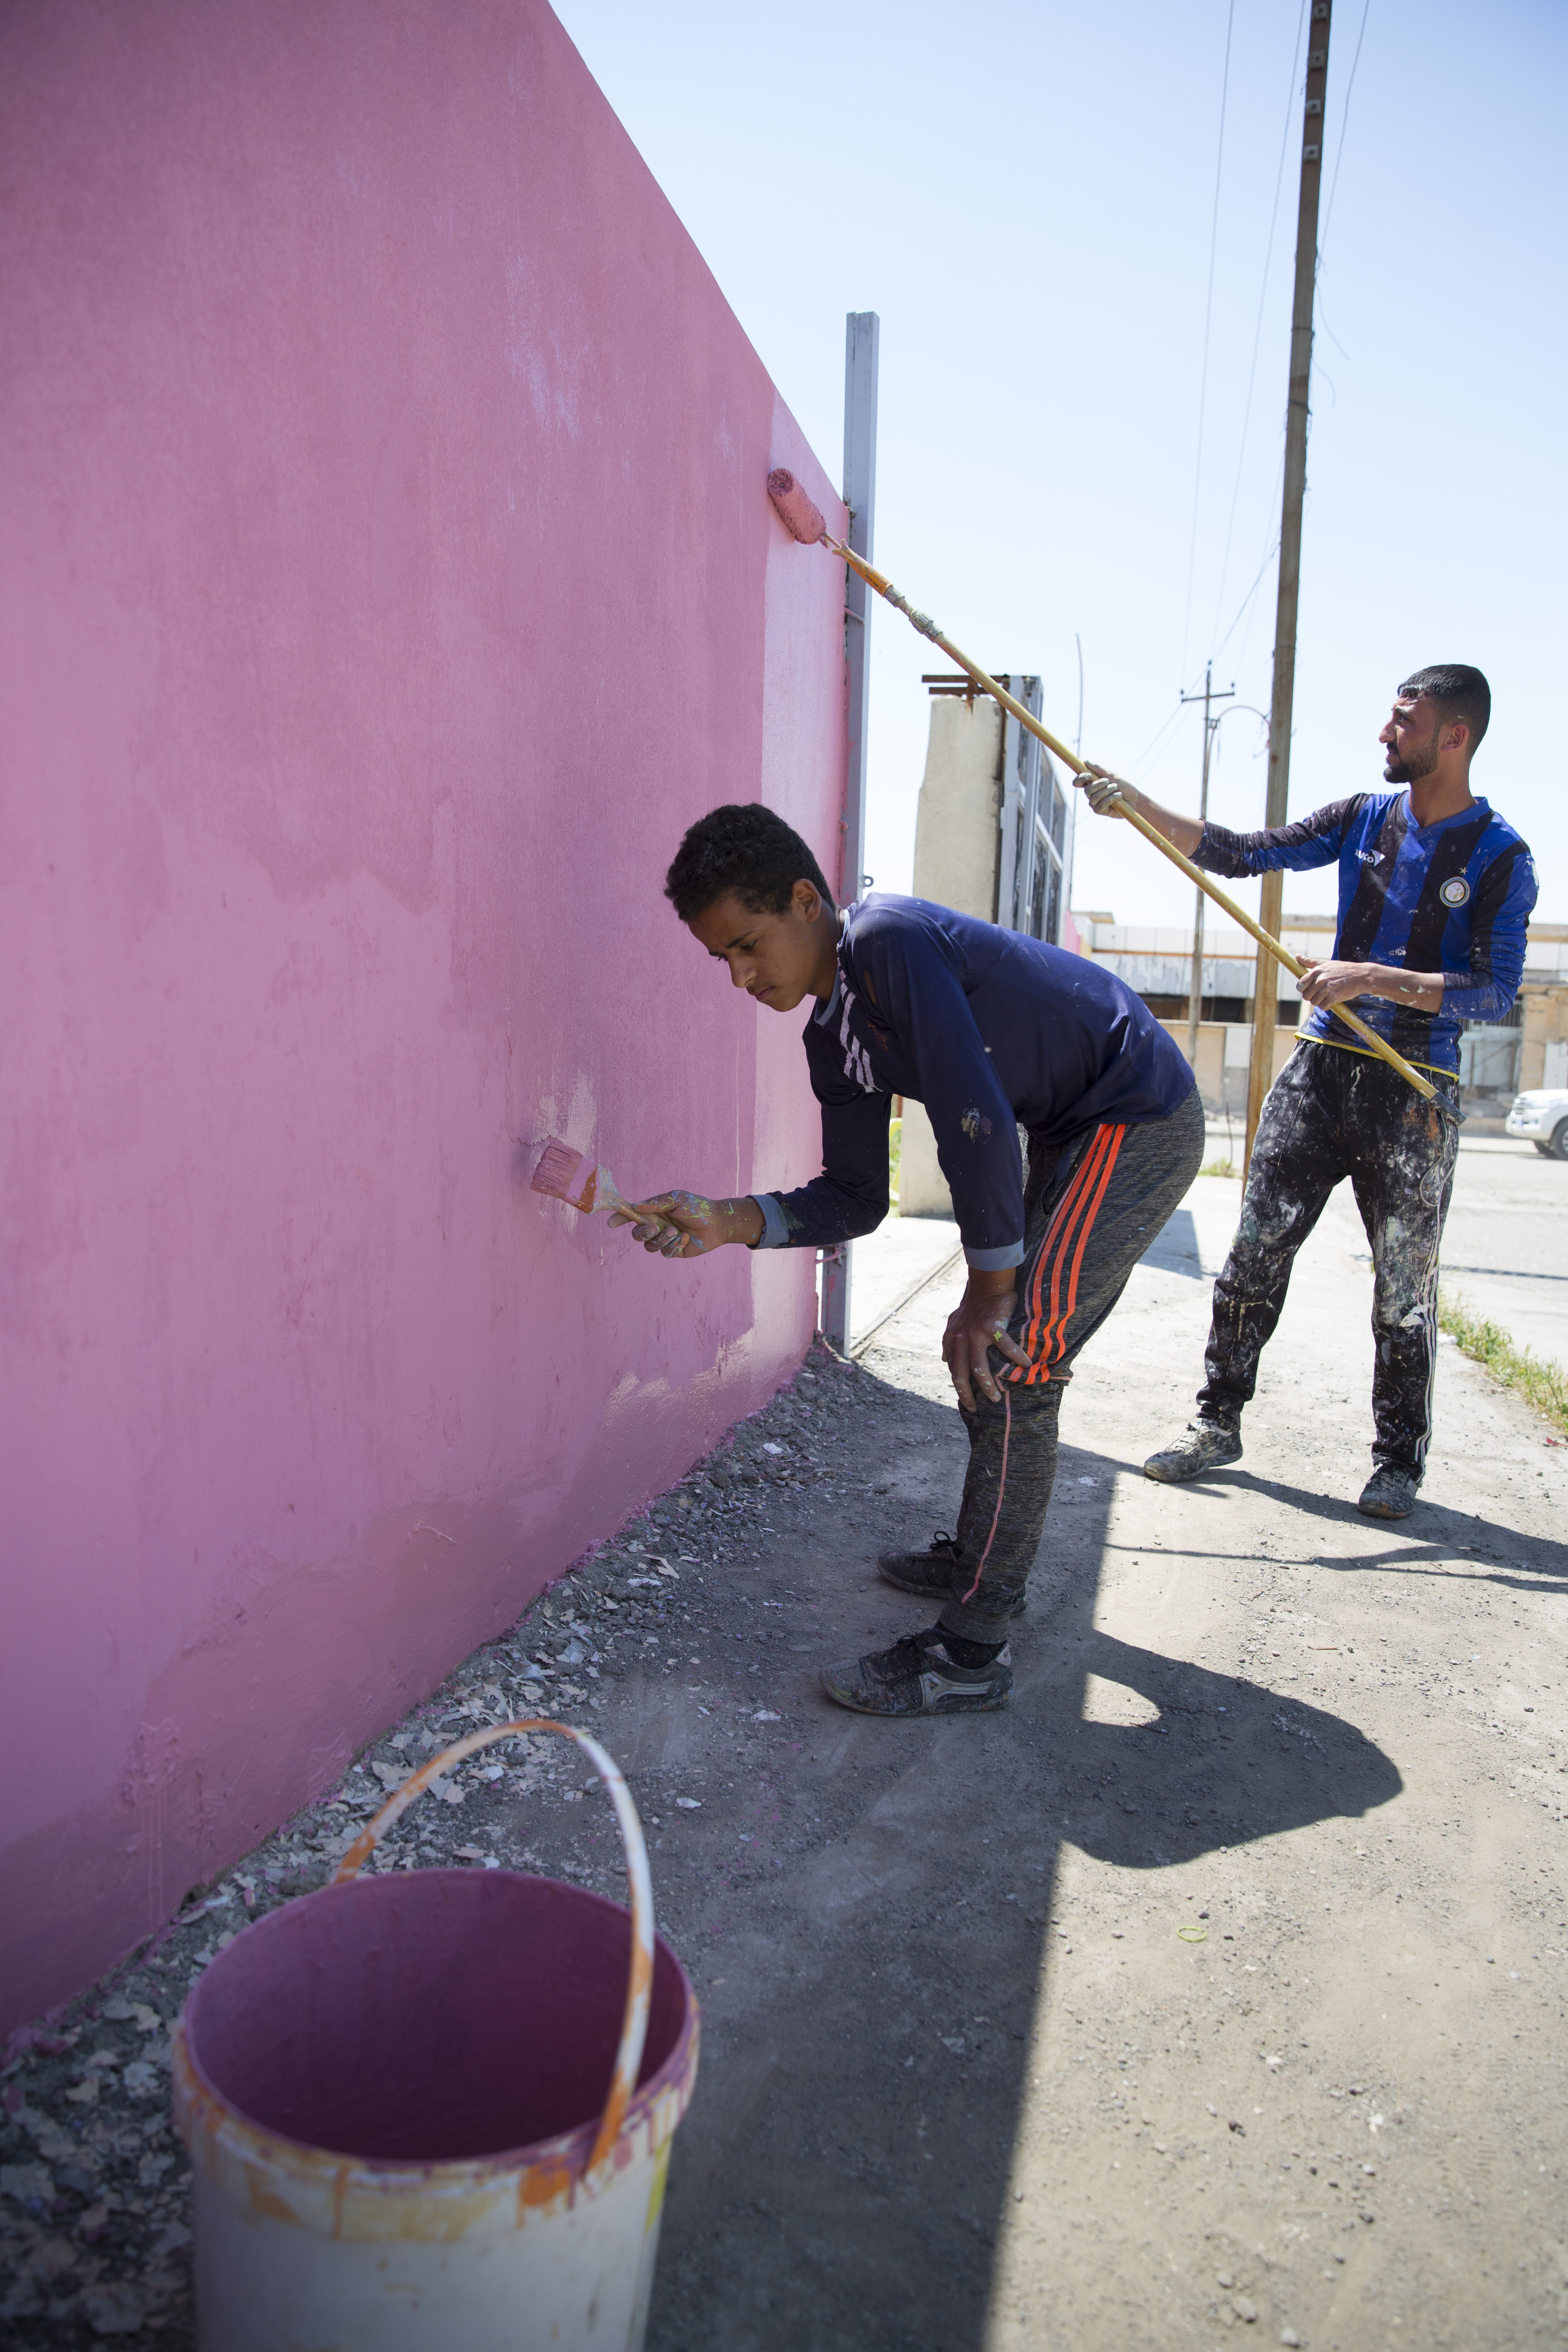 As part of a cash-for-work project in Mosul, a school is being rehabilitated